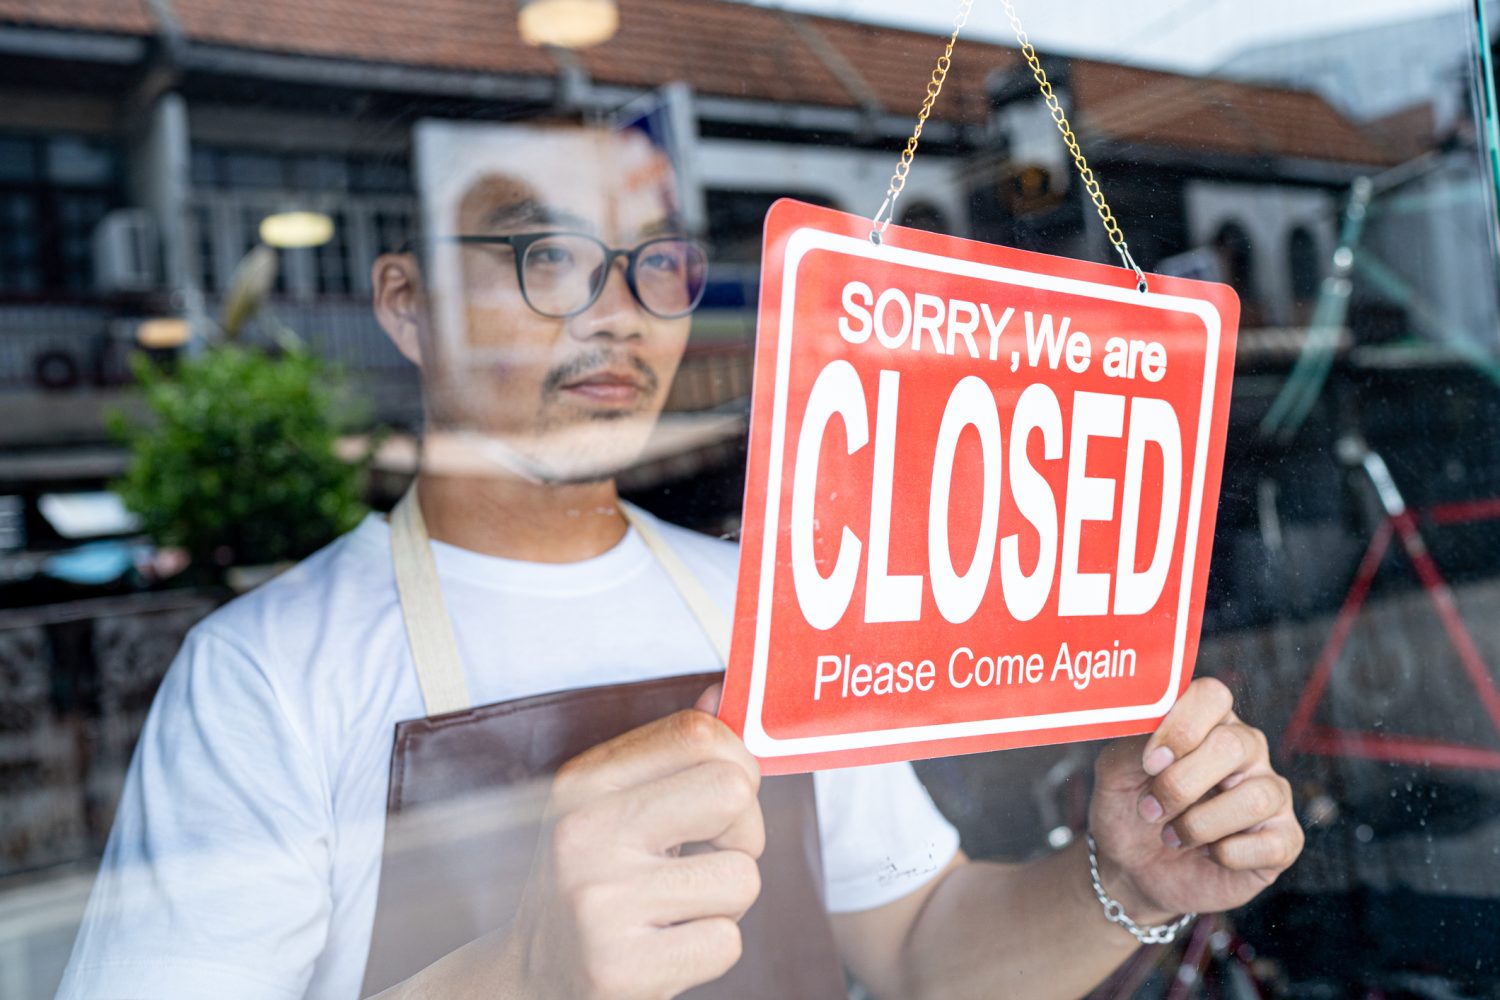 A business owner is forced to hang up a “closed” sign after a natural disaster.